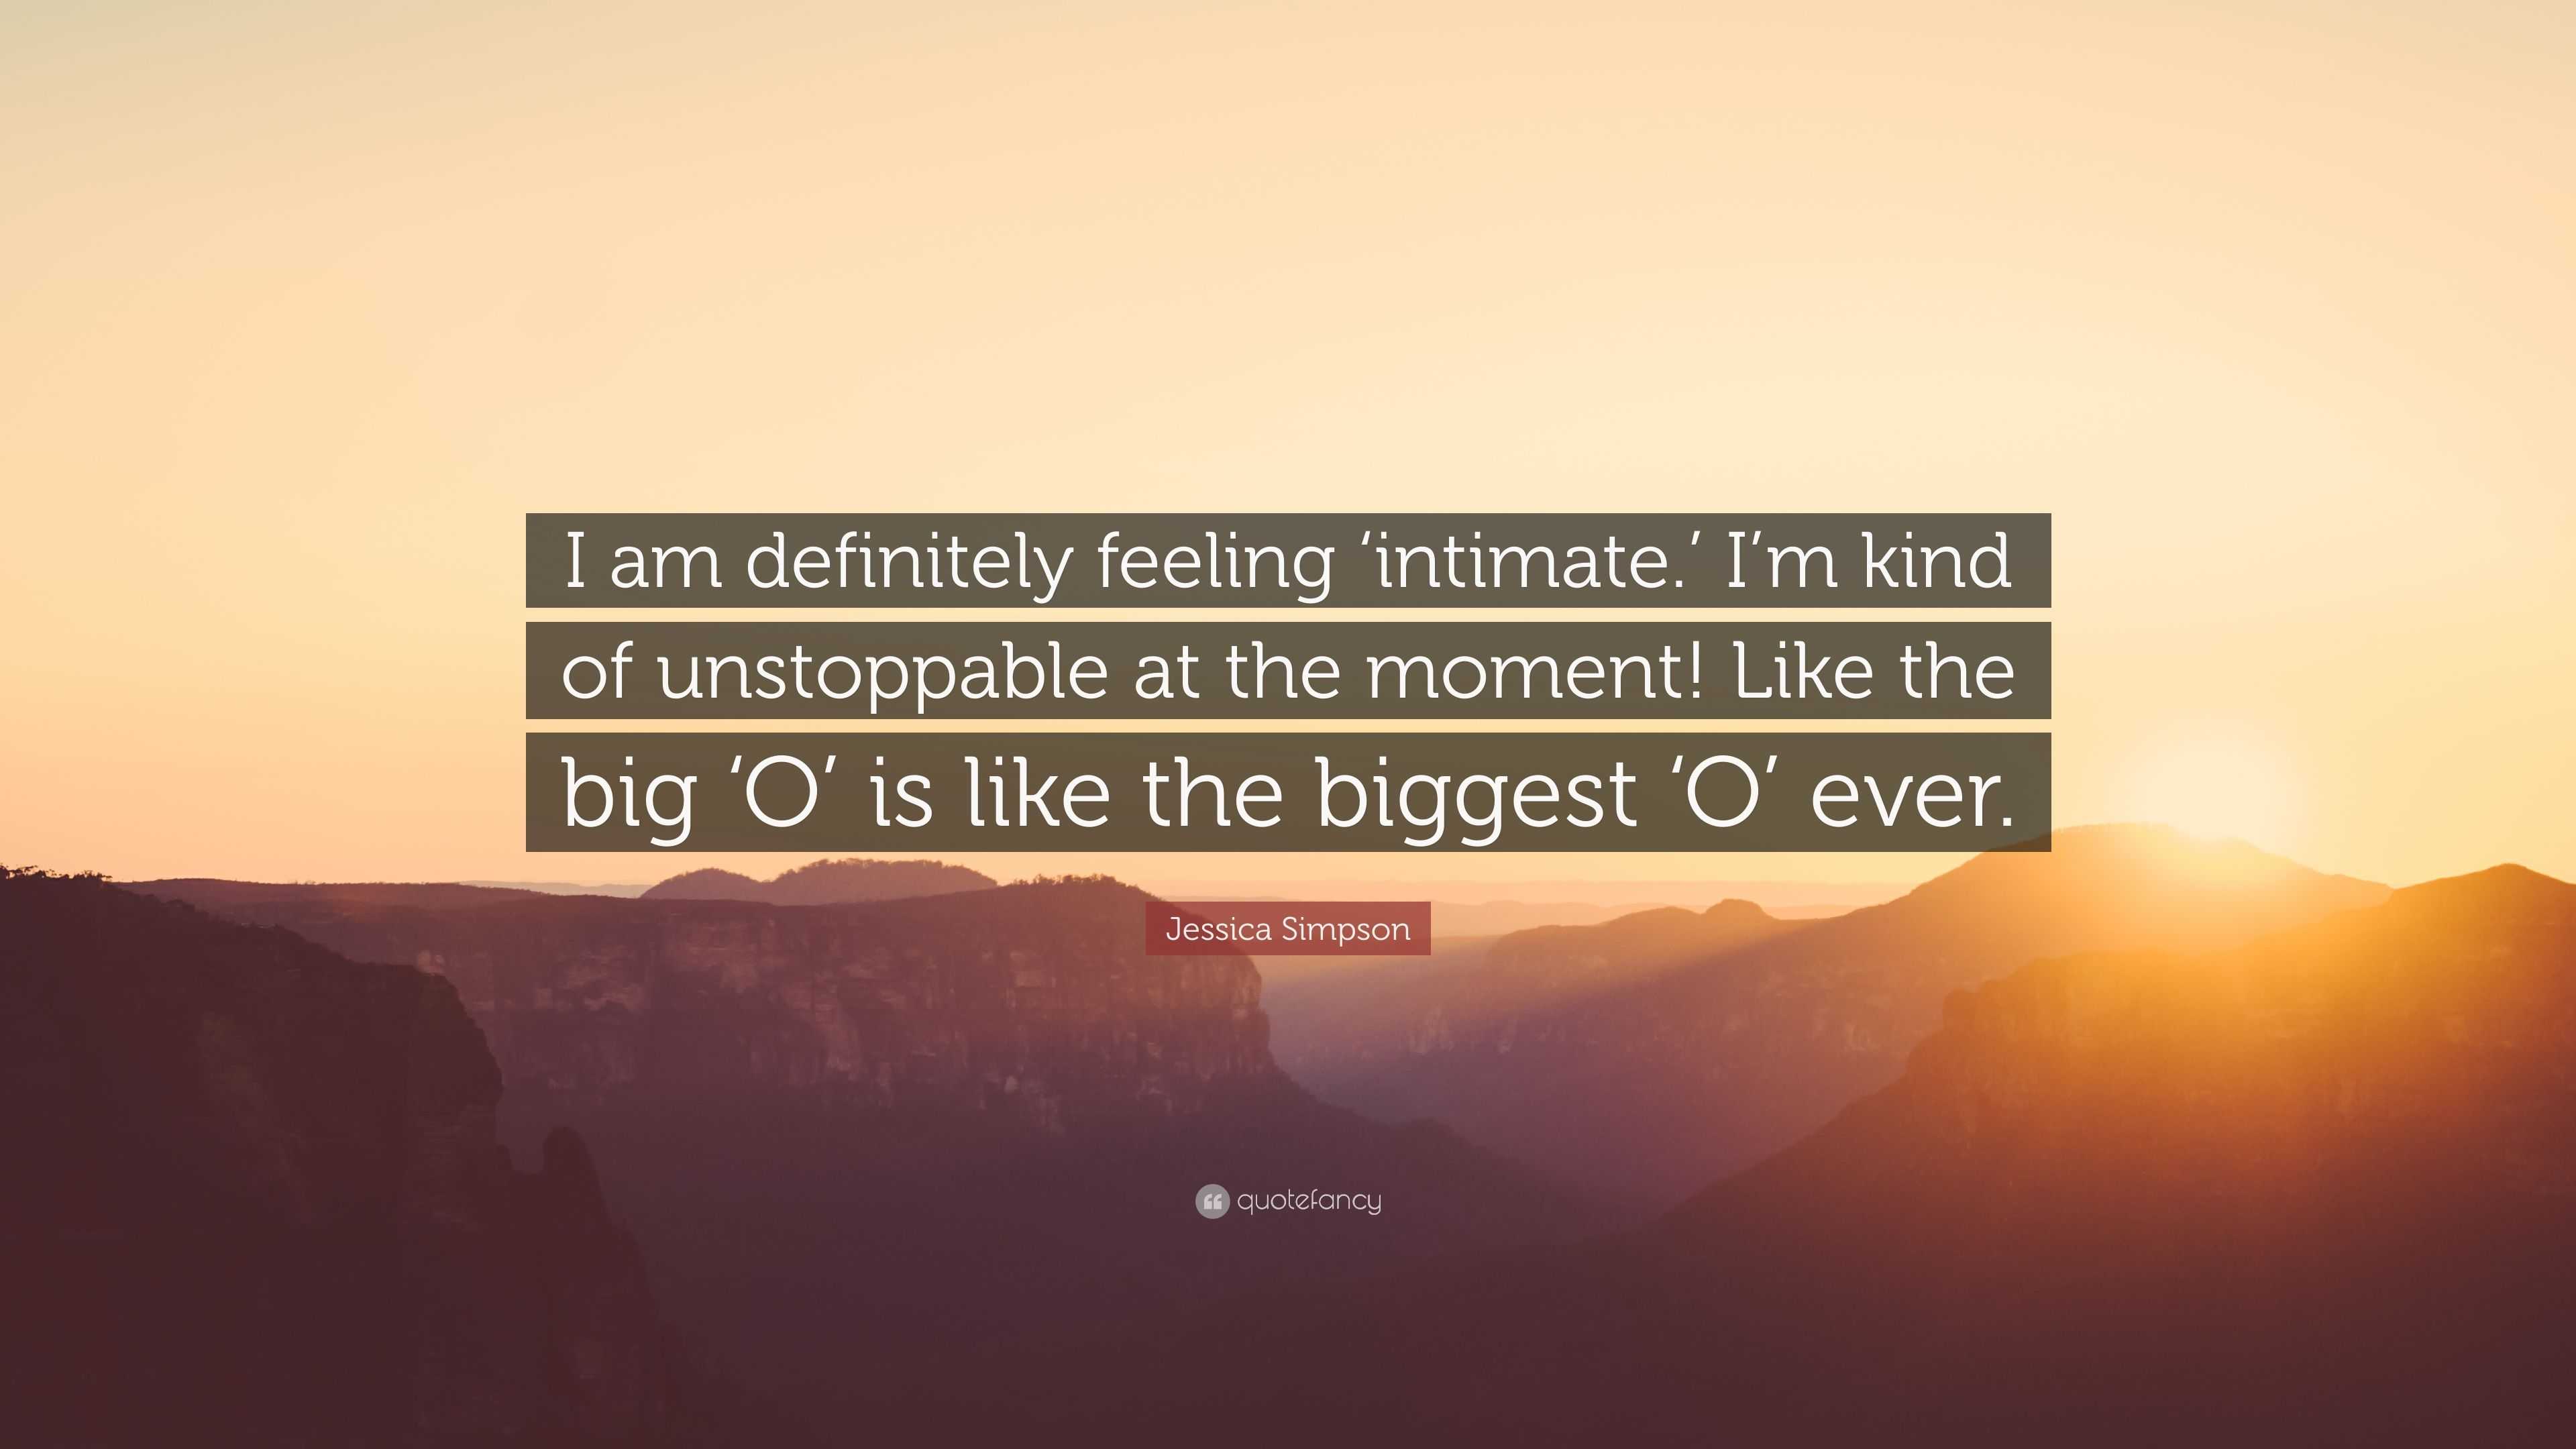 Jessica Simpson Quote: “I am definitely feeling 'intimate.' I'm kind of  unstoppable at the moment! Like the big 'O' is like the biggest 'O' ever”